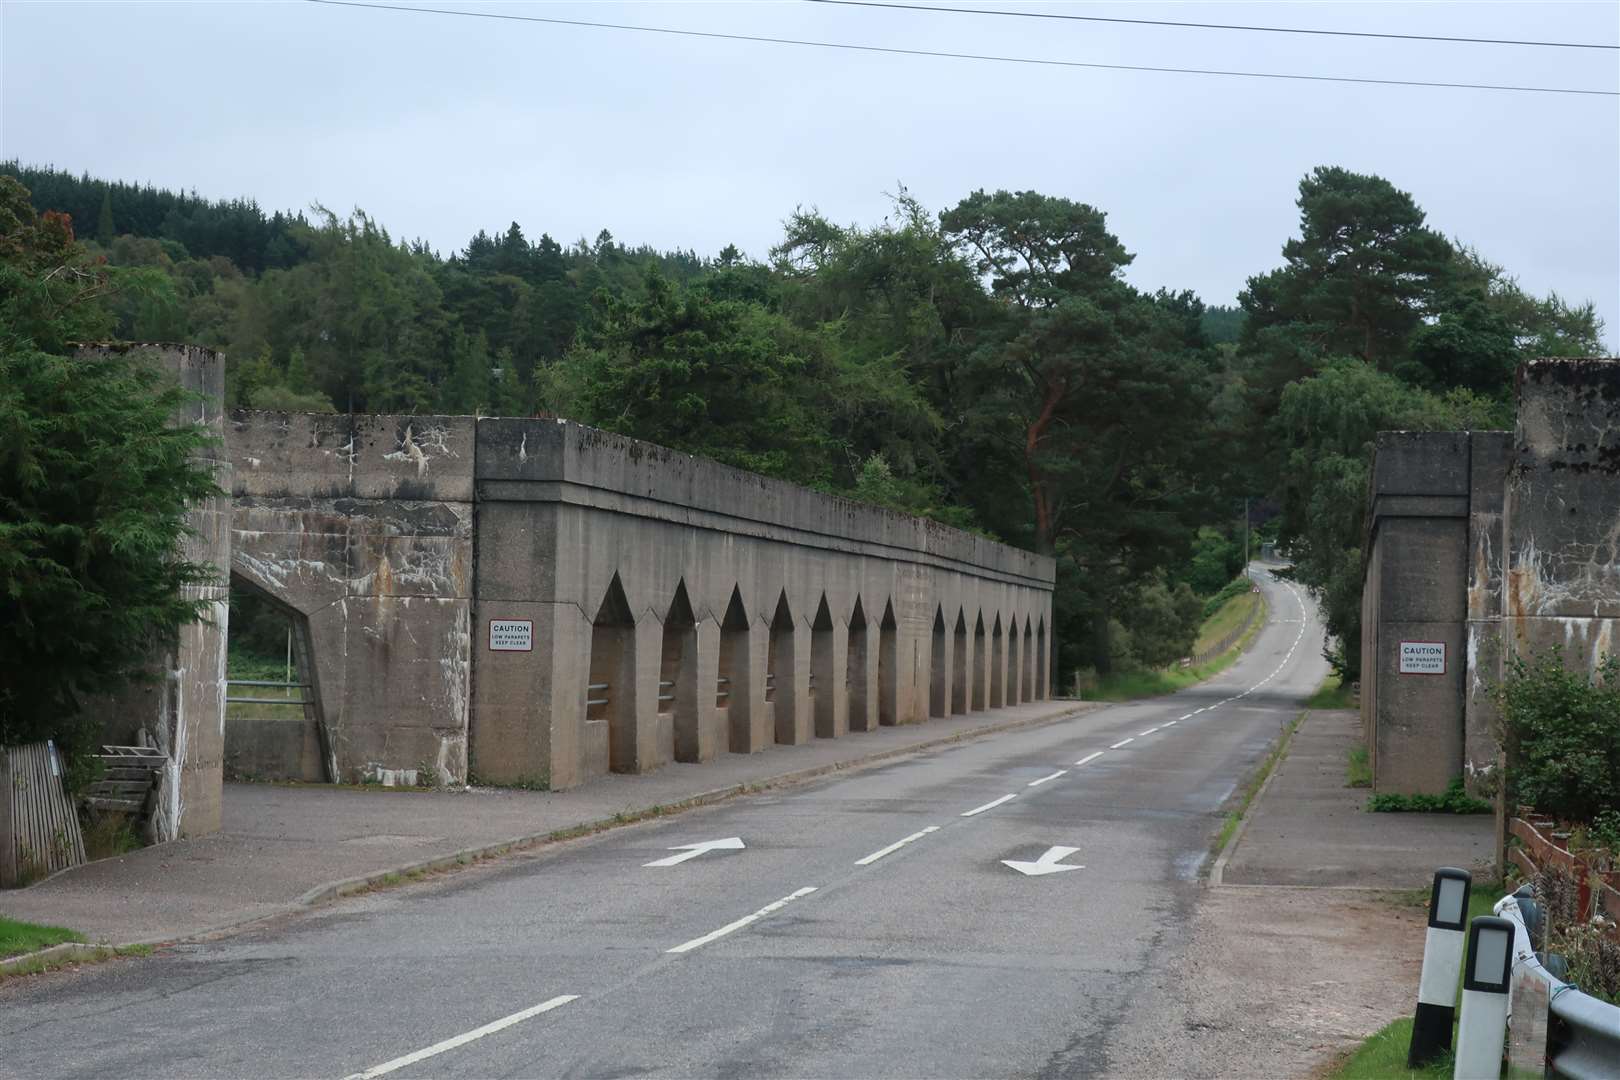 The Findhorn Bridge south of Tomatin dates from 1926.